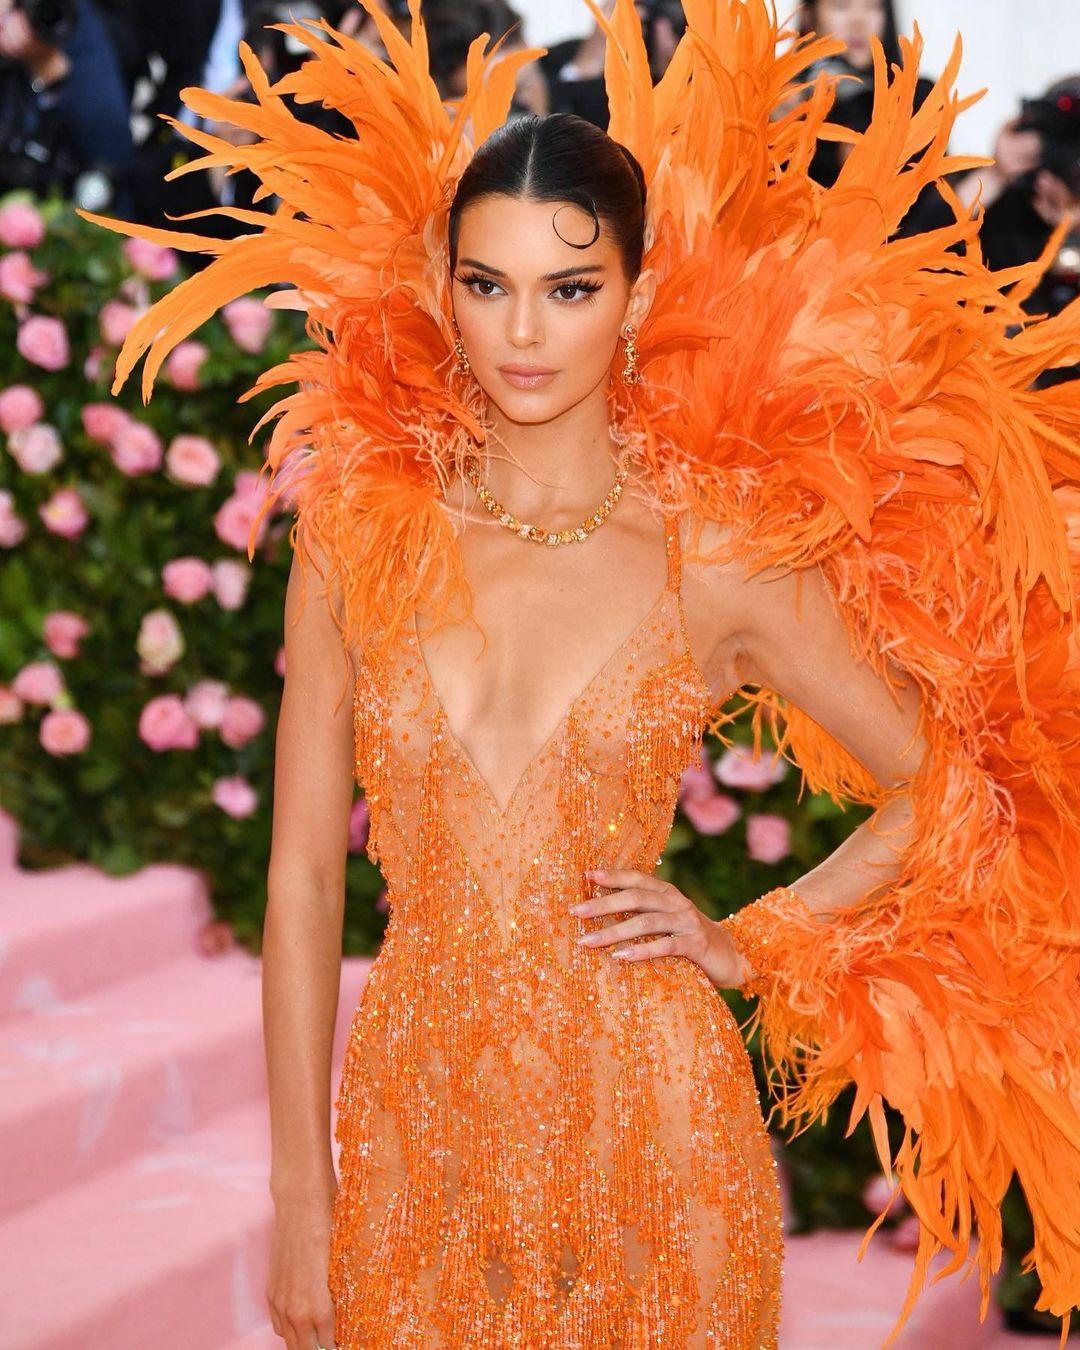 A Kendall Jenner fashion gallery starting with this look is a must. Kendall Jenner wore this huge orange feathered Versace gown with her hair slicked back in a flapper-esque style for the Met Gala in in 2019. This look has gone down in history as one of her best